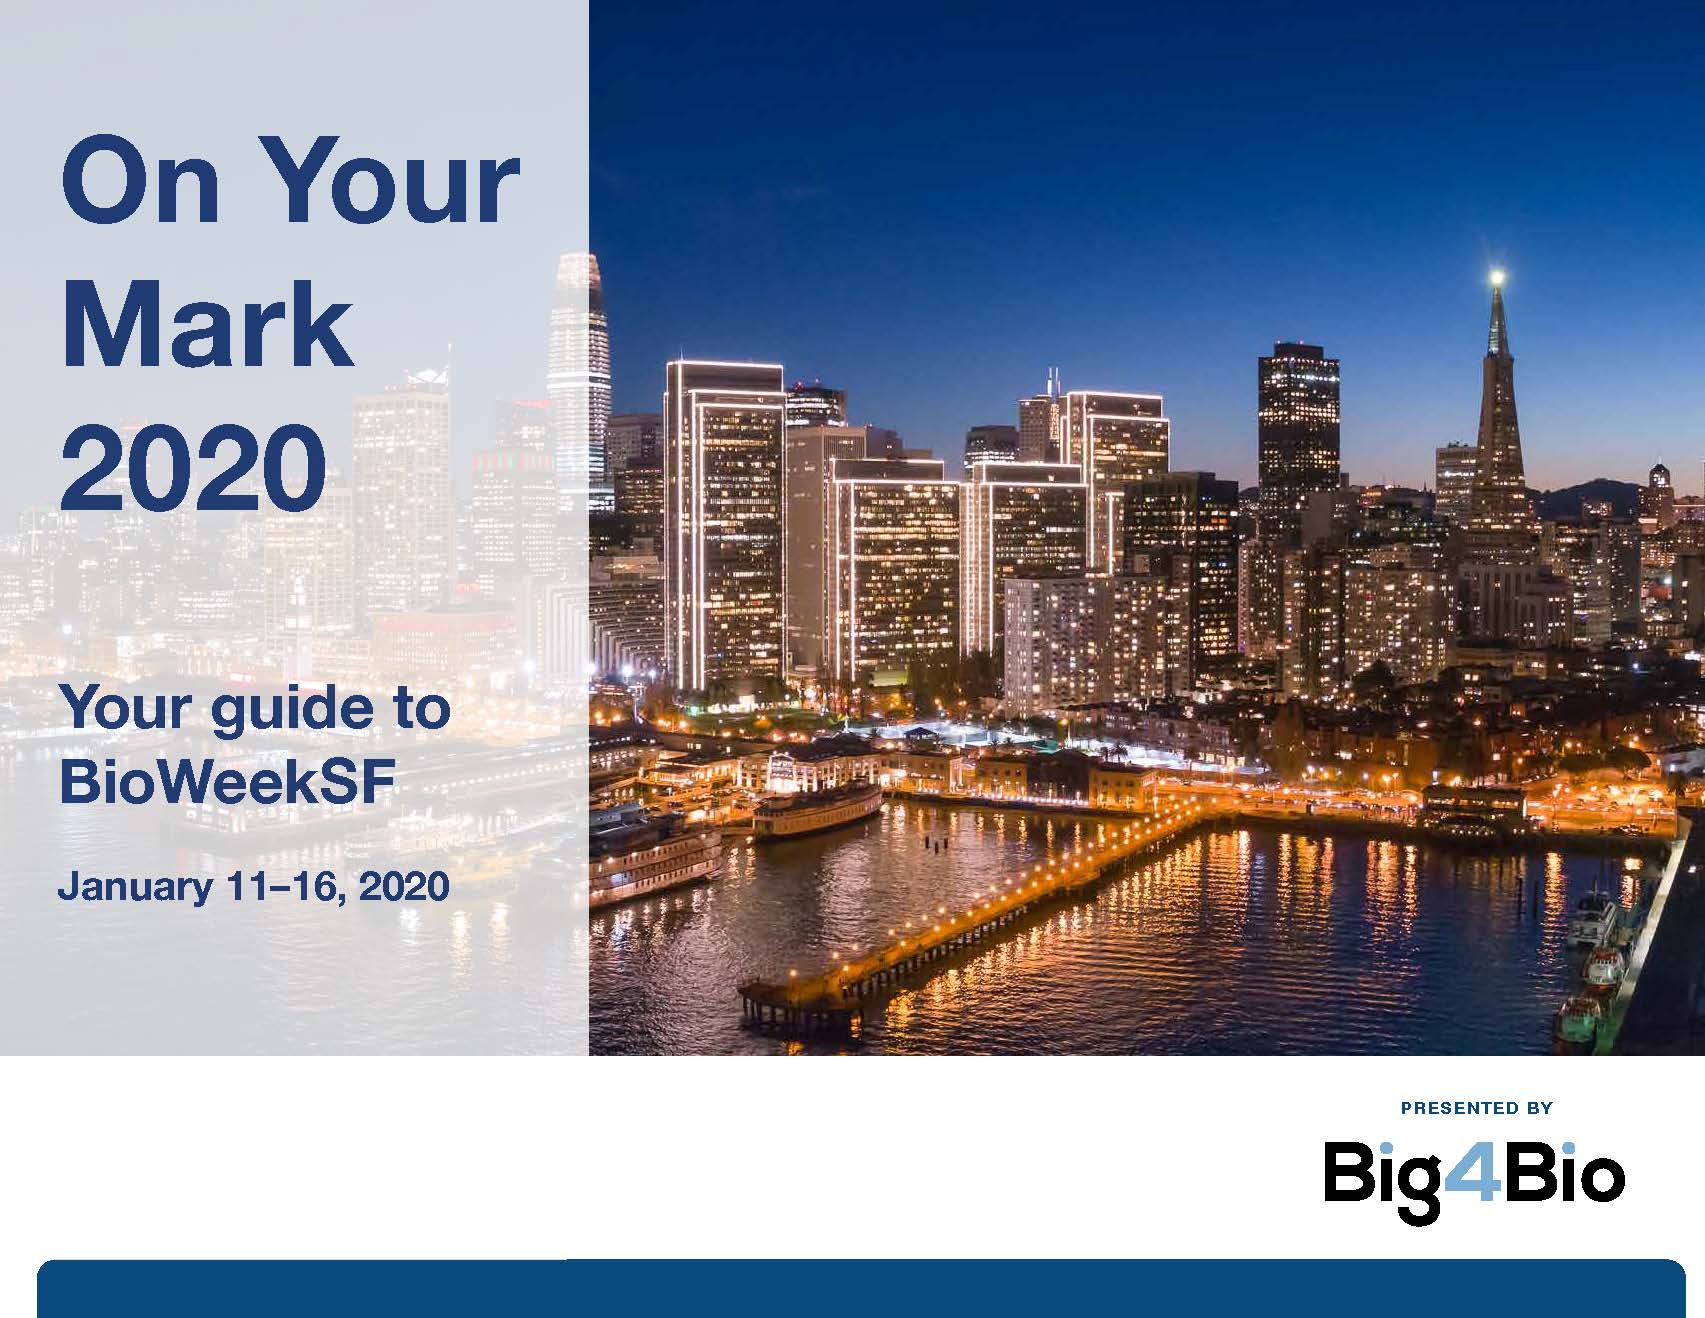 On Your Mark 2020: <br>The Complete Guide to BioWeekSF (FINAL version)